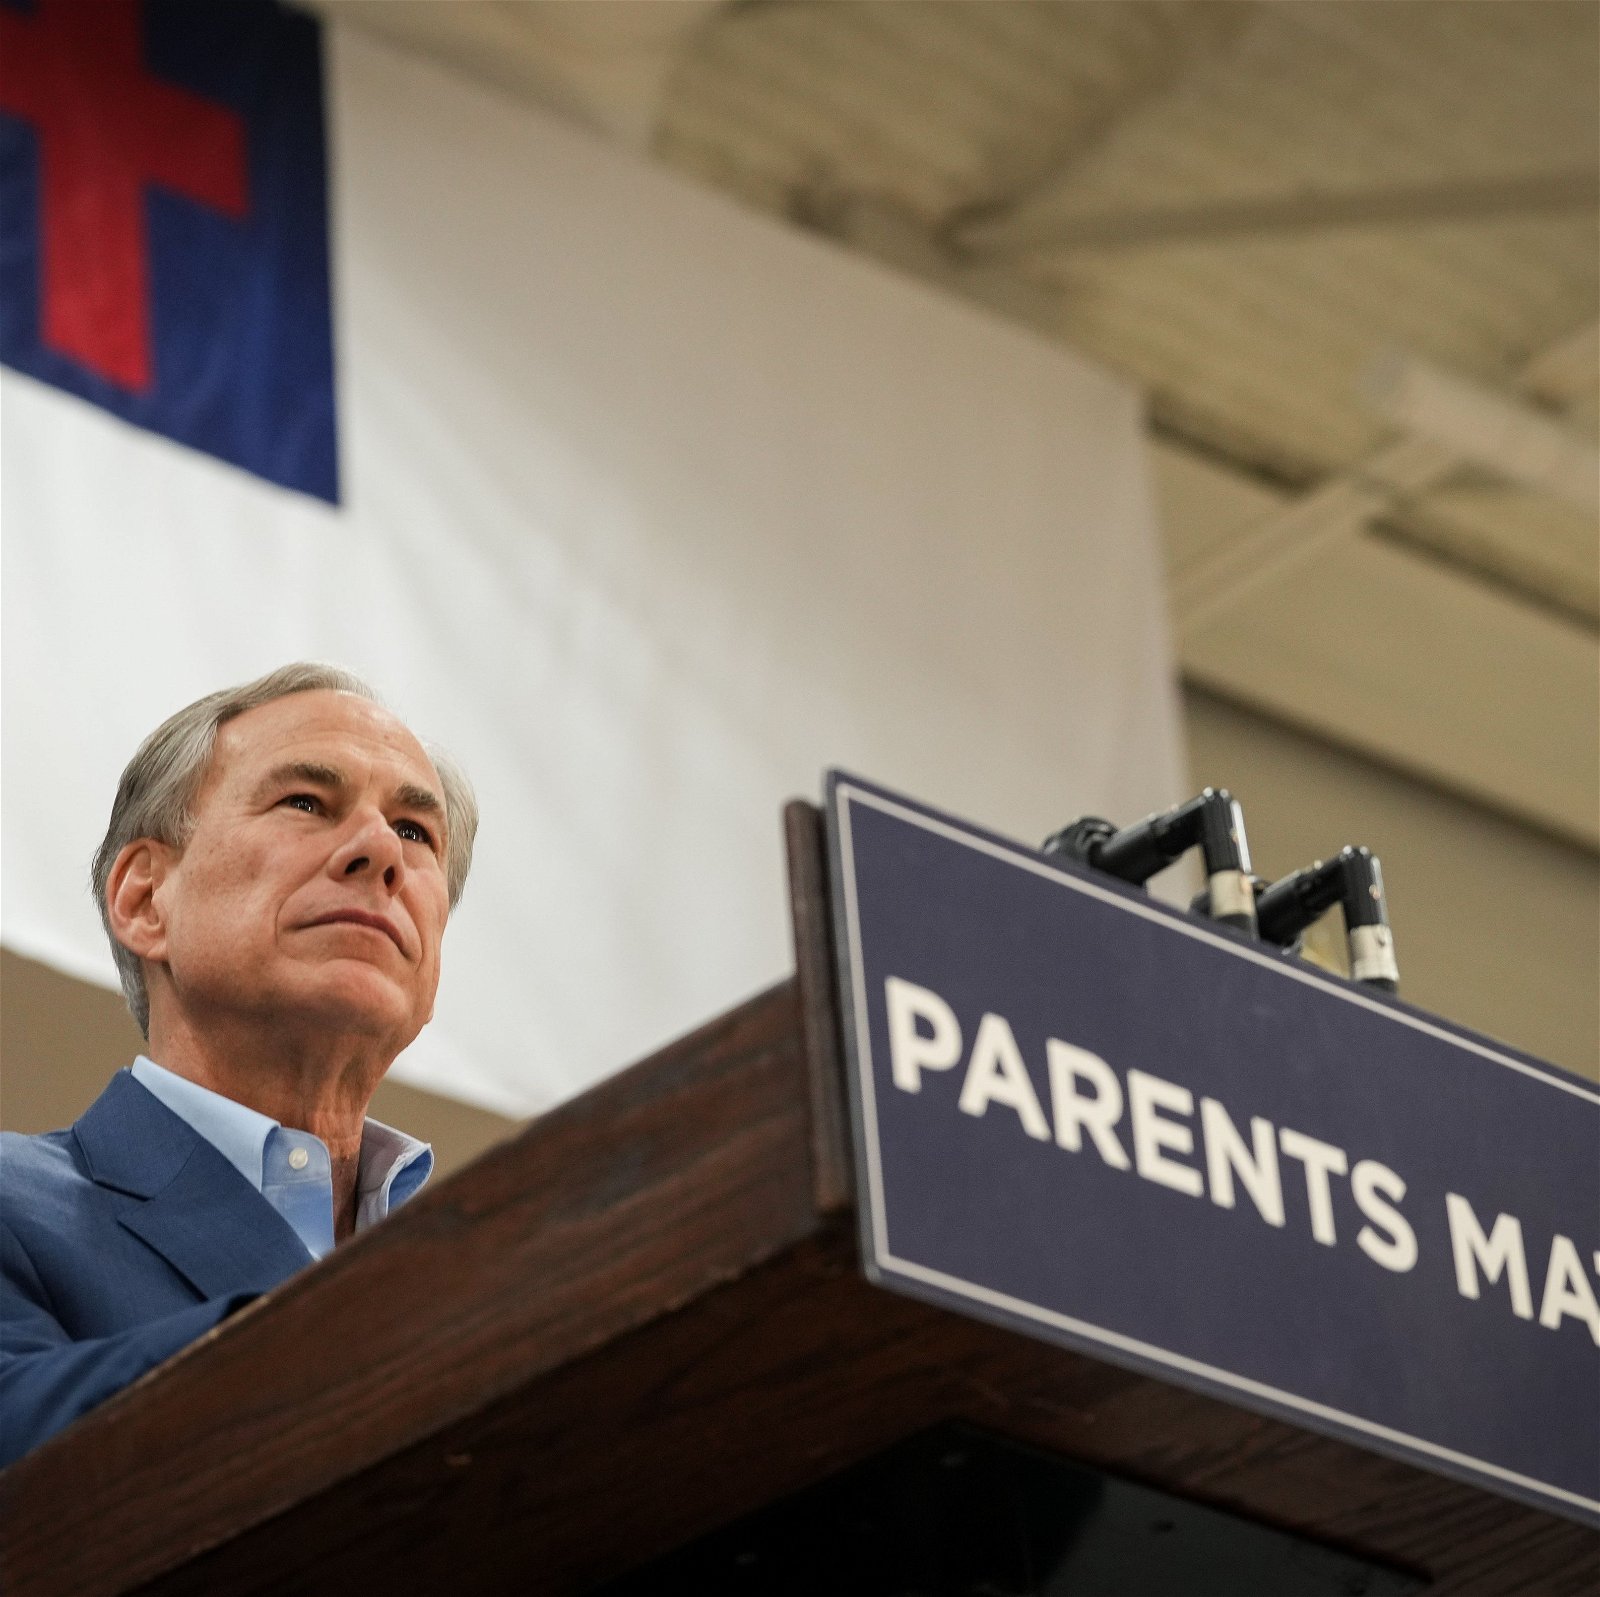 Greg Abbott and Ken Paxton Have Pulled The Wool Over The Eyes of Texas